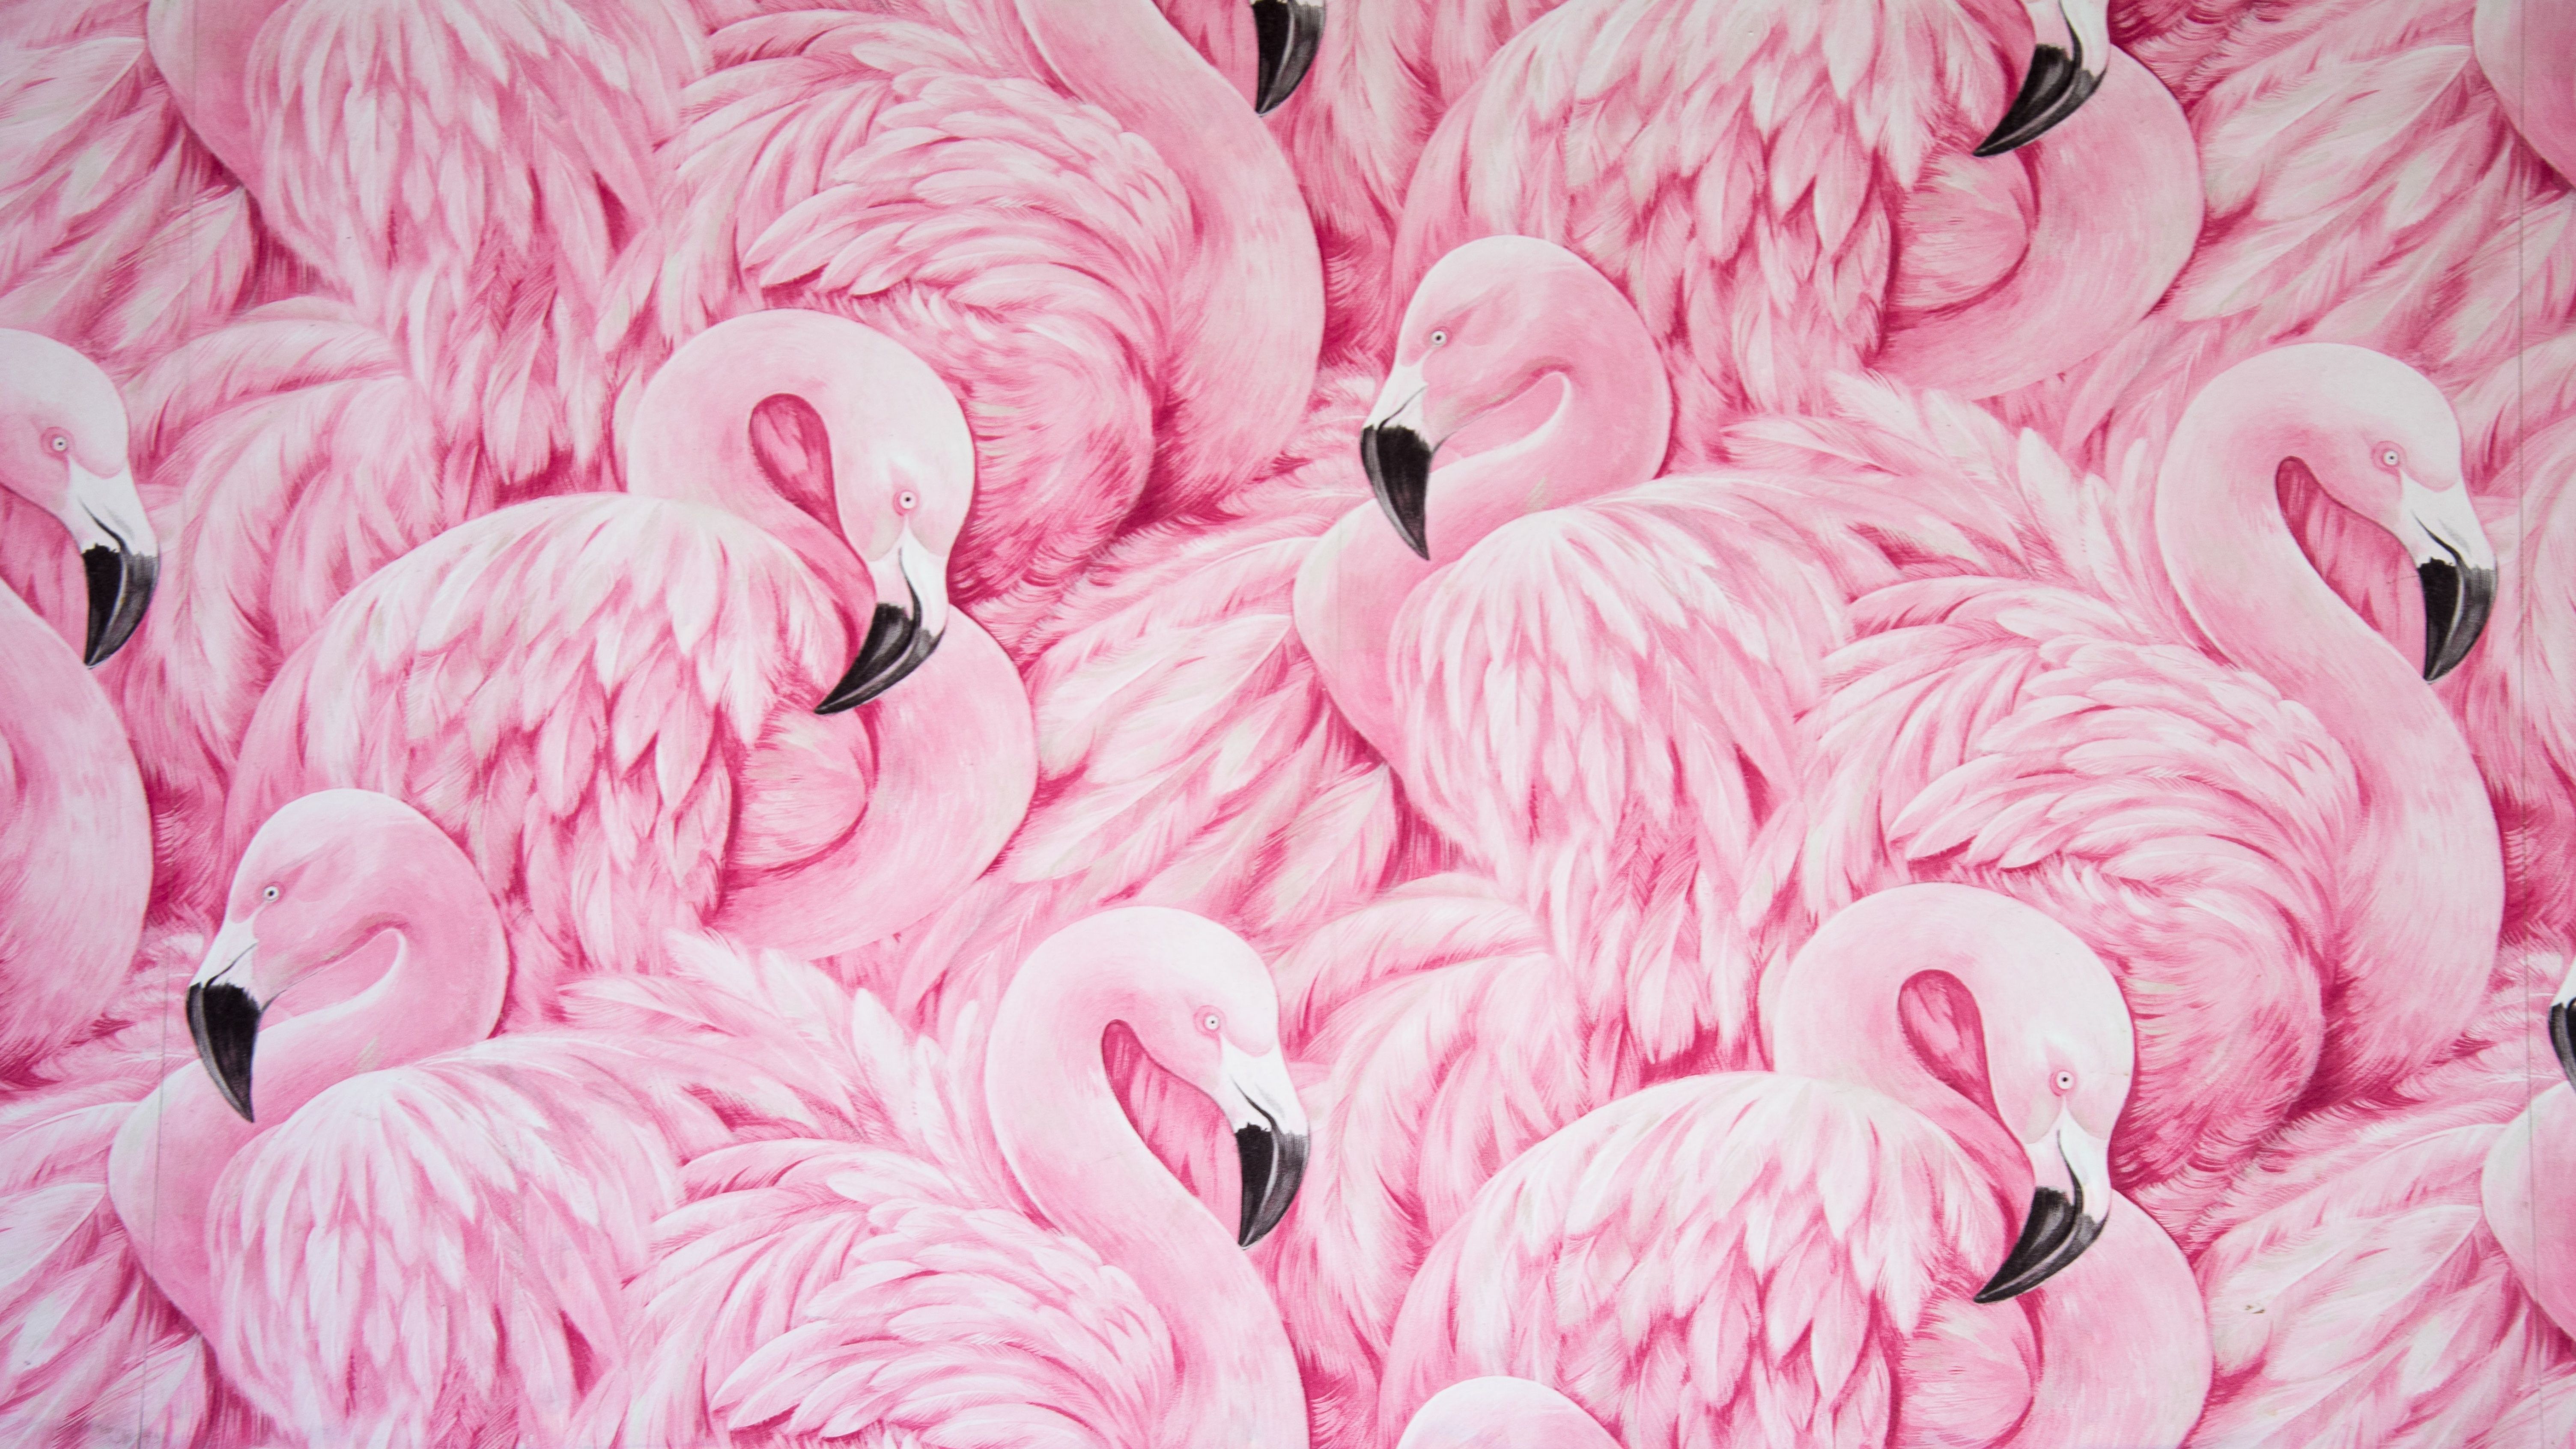 A painting of a flock of pink flamingos. - Feathers